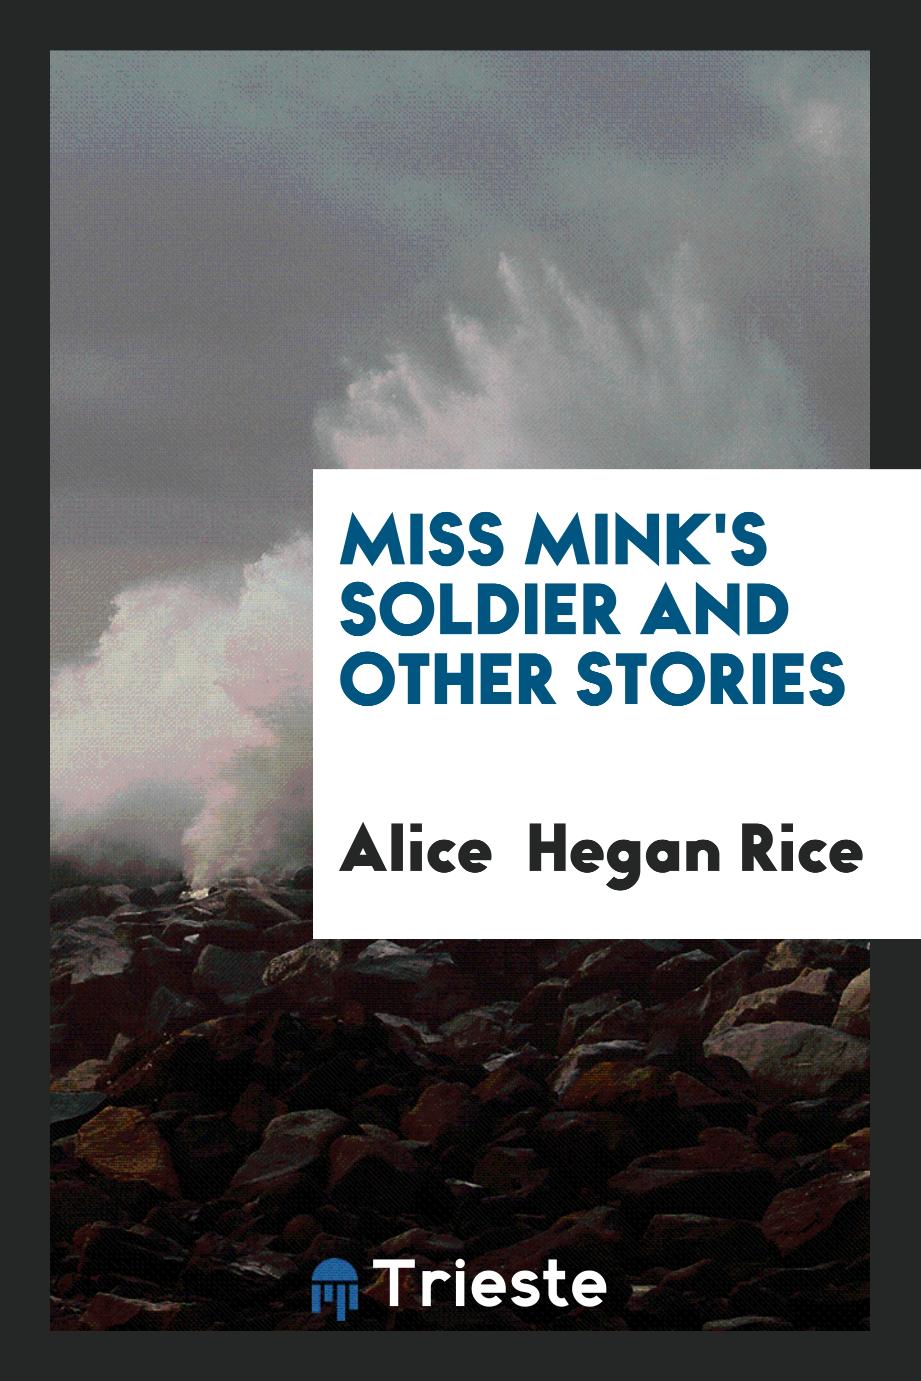 Miss Mink's soldier and other stories